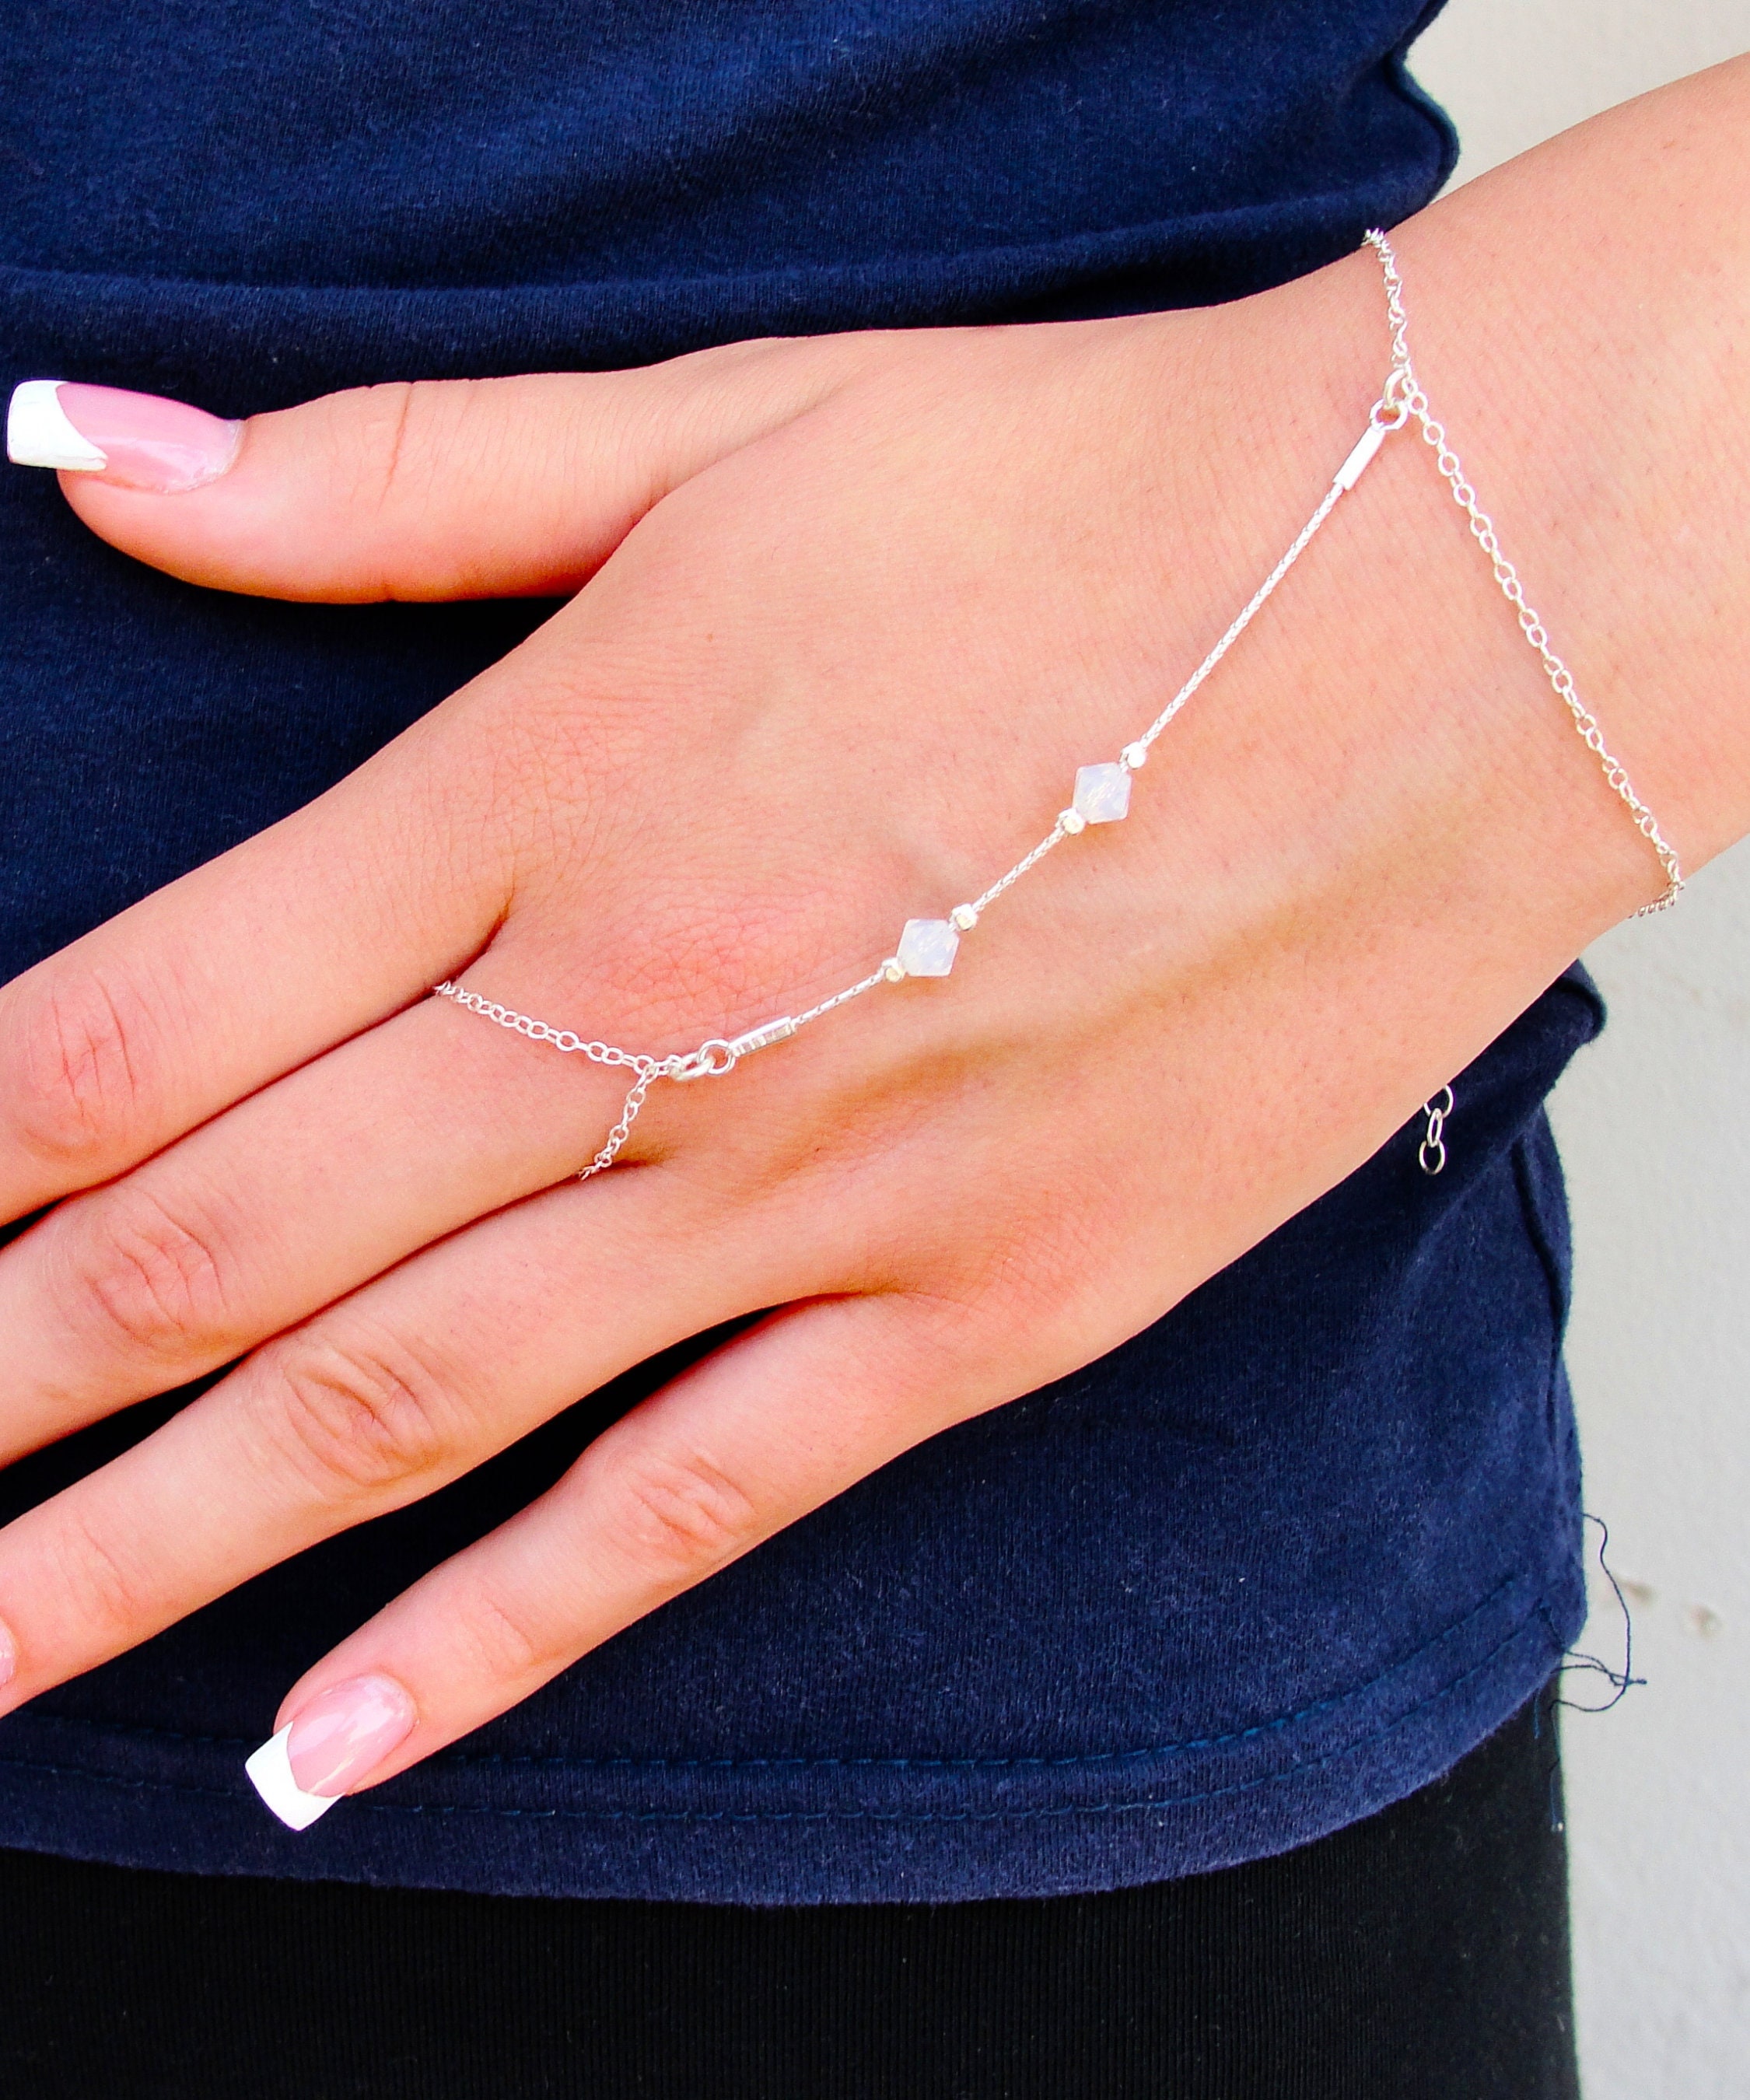 Rose Gold Slave Bracelet Ring, Delicate Hand Chains, Handchains – AMYO  Jewelry